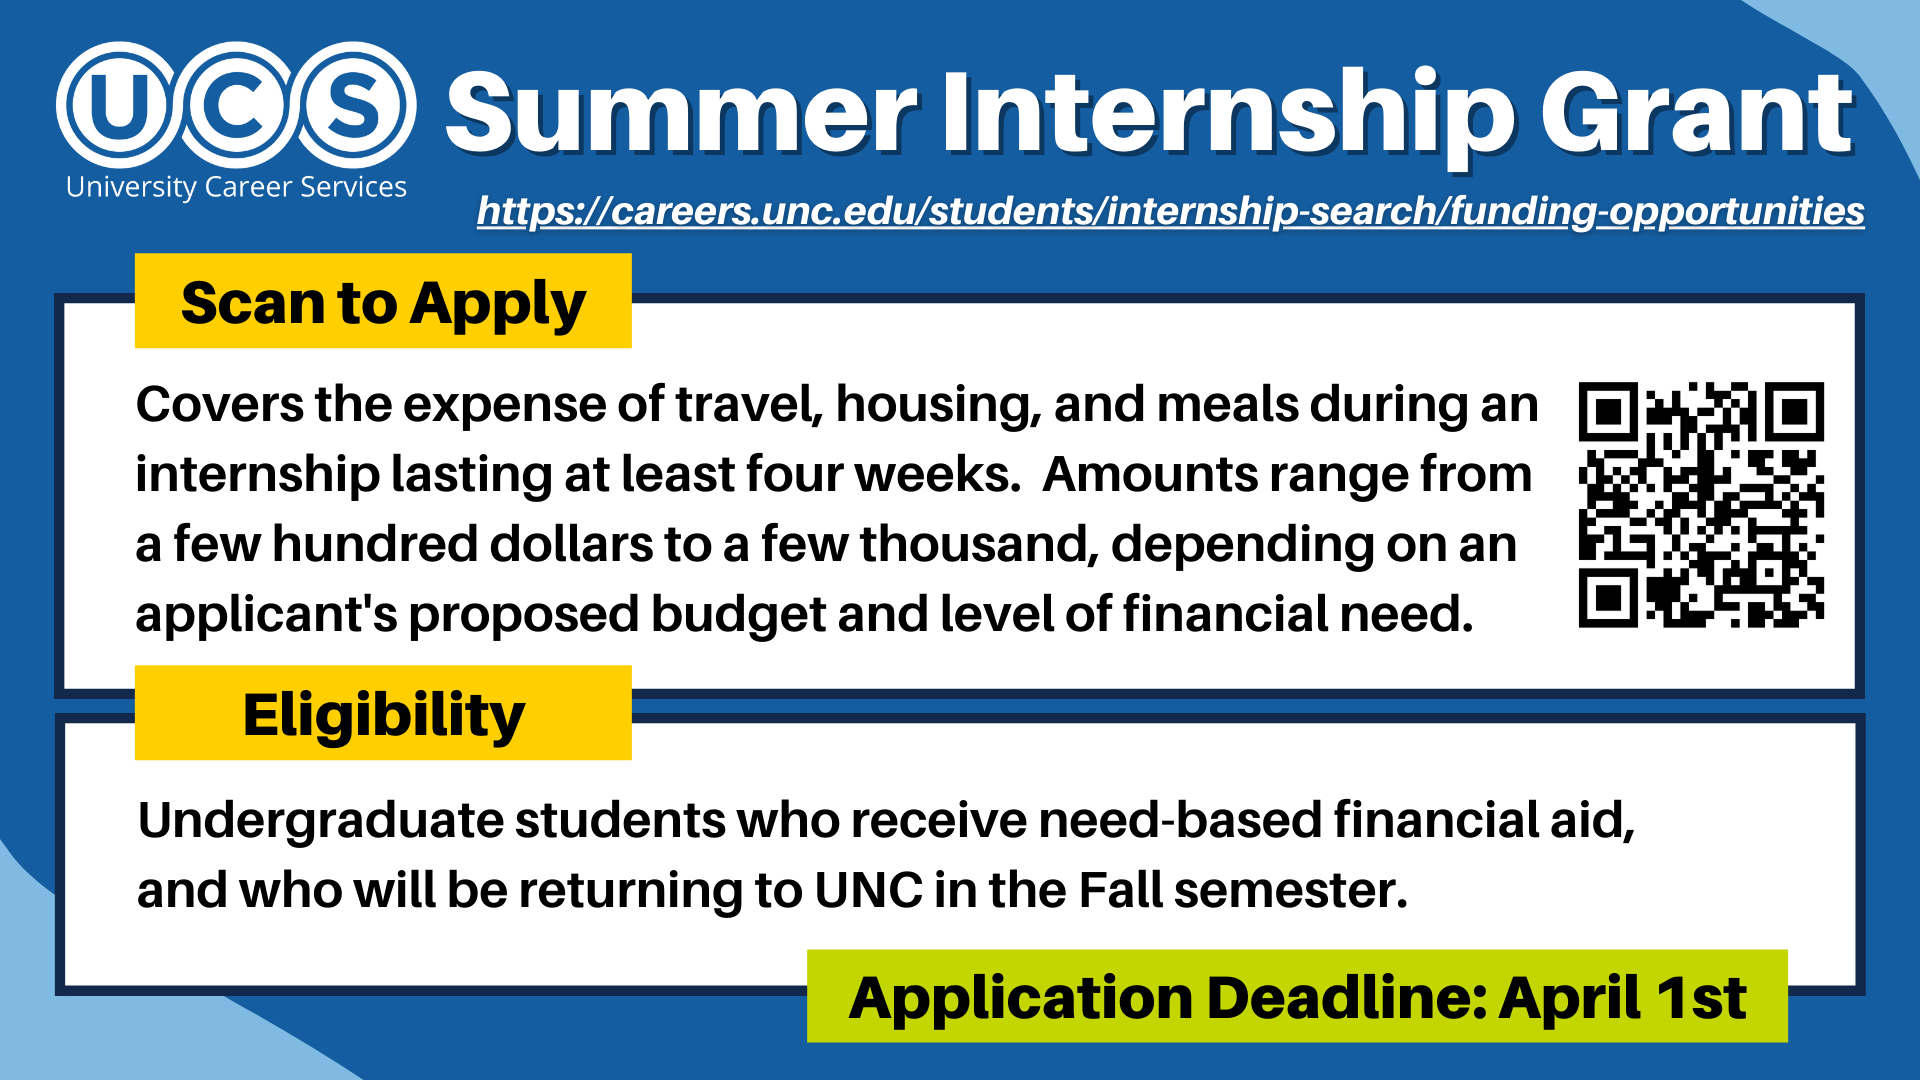 Covers the expense of travel, housing, and meals during an internship lasting at least four weeks.  Amounts range from a few hundred dollars to a few thousand, depending on an applicant's proposed budget and level of financial need.